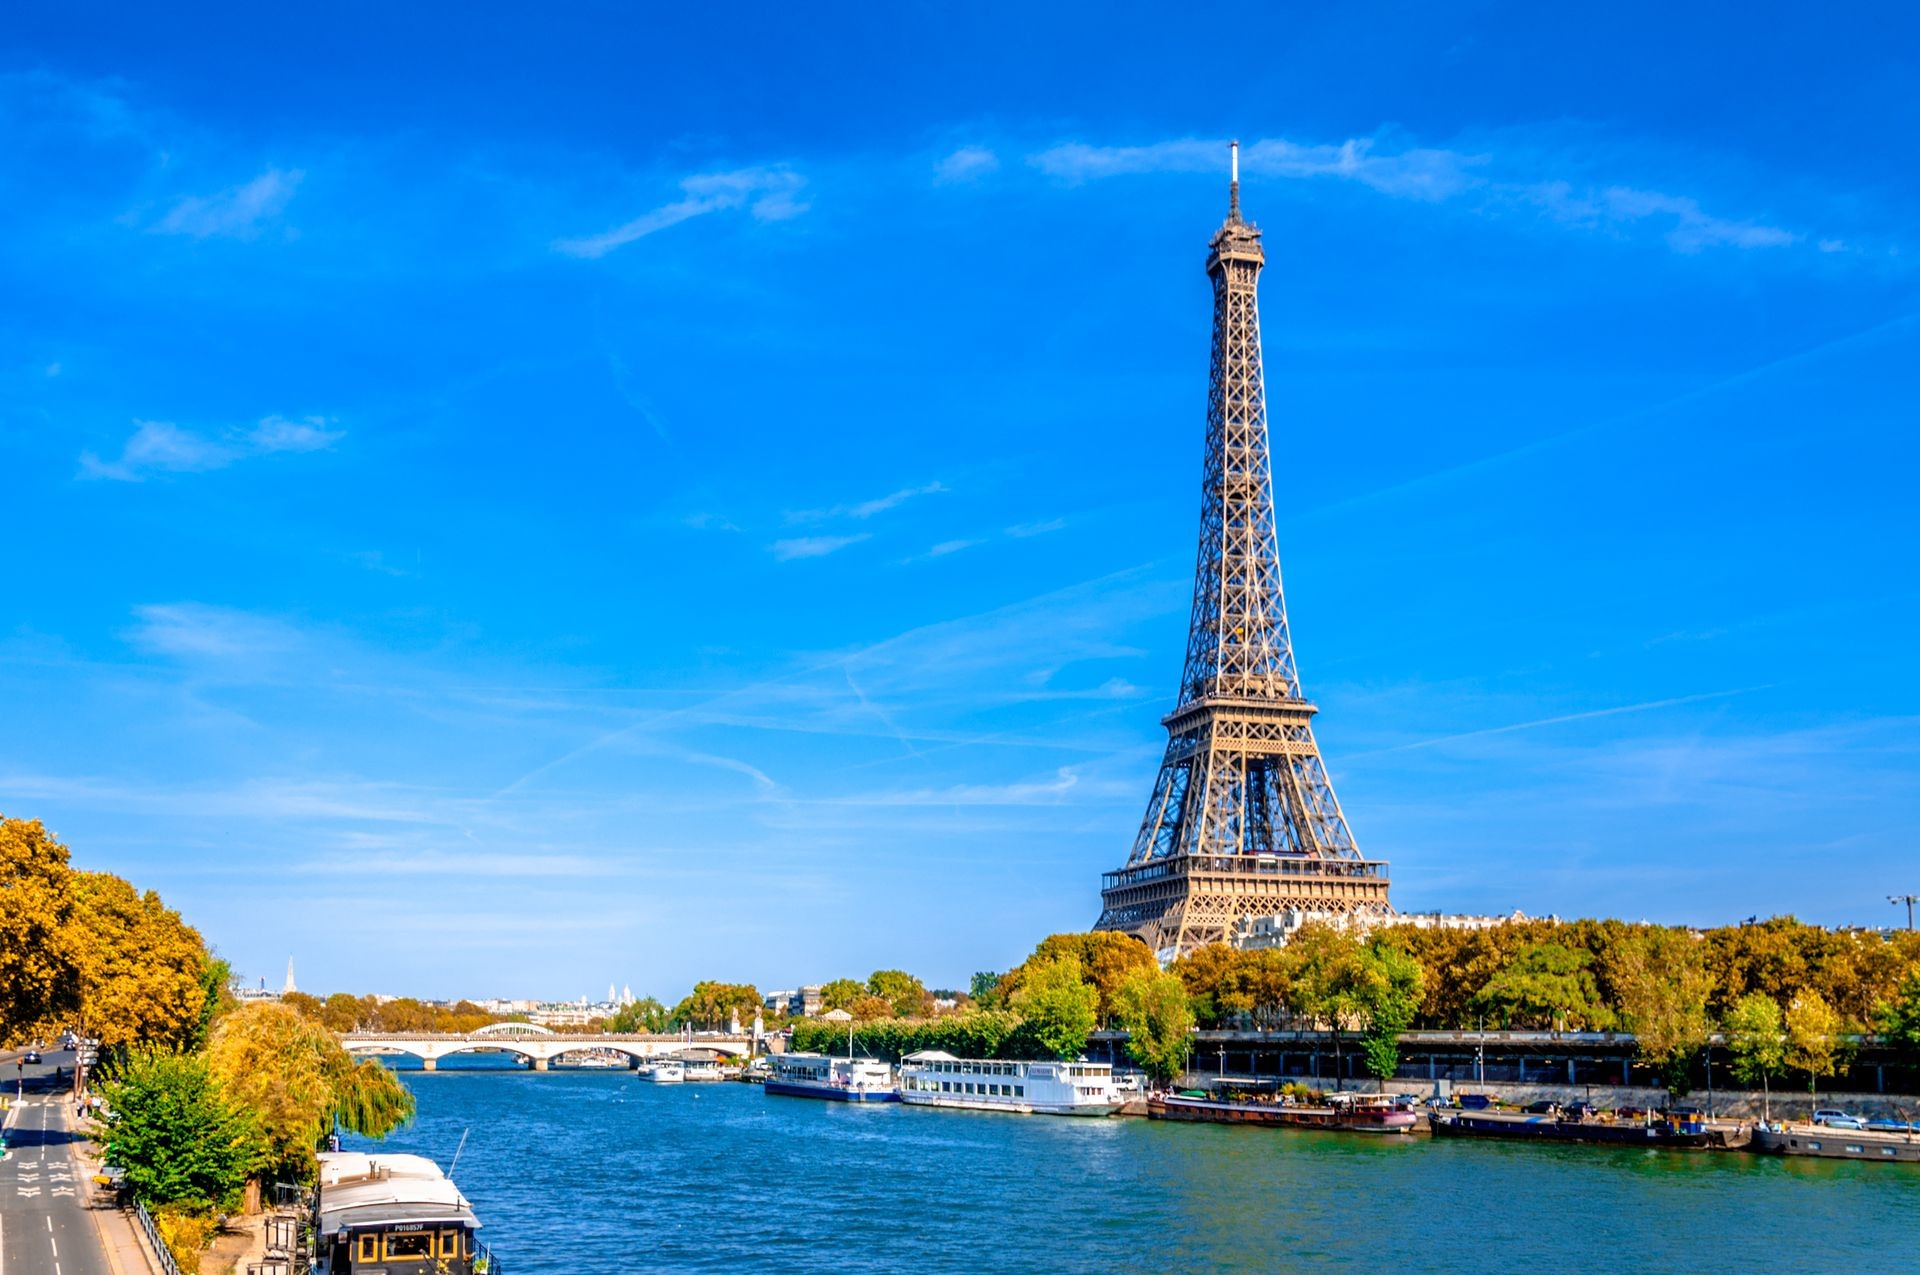 Panoramic view of Paris with the Eiffel tower and the River Seine in a sunny day at autumn.